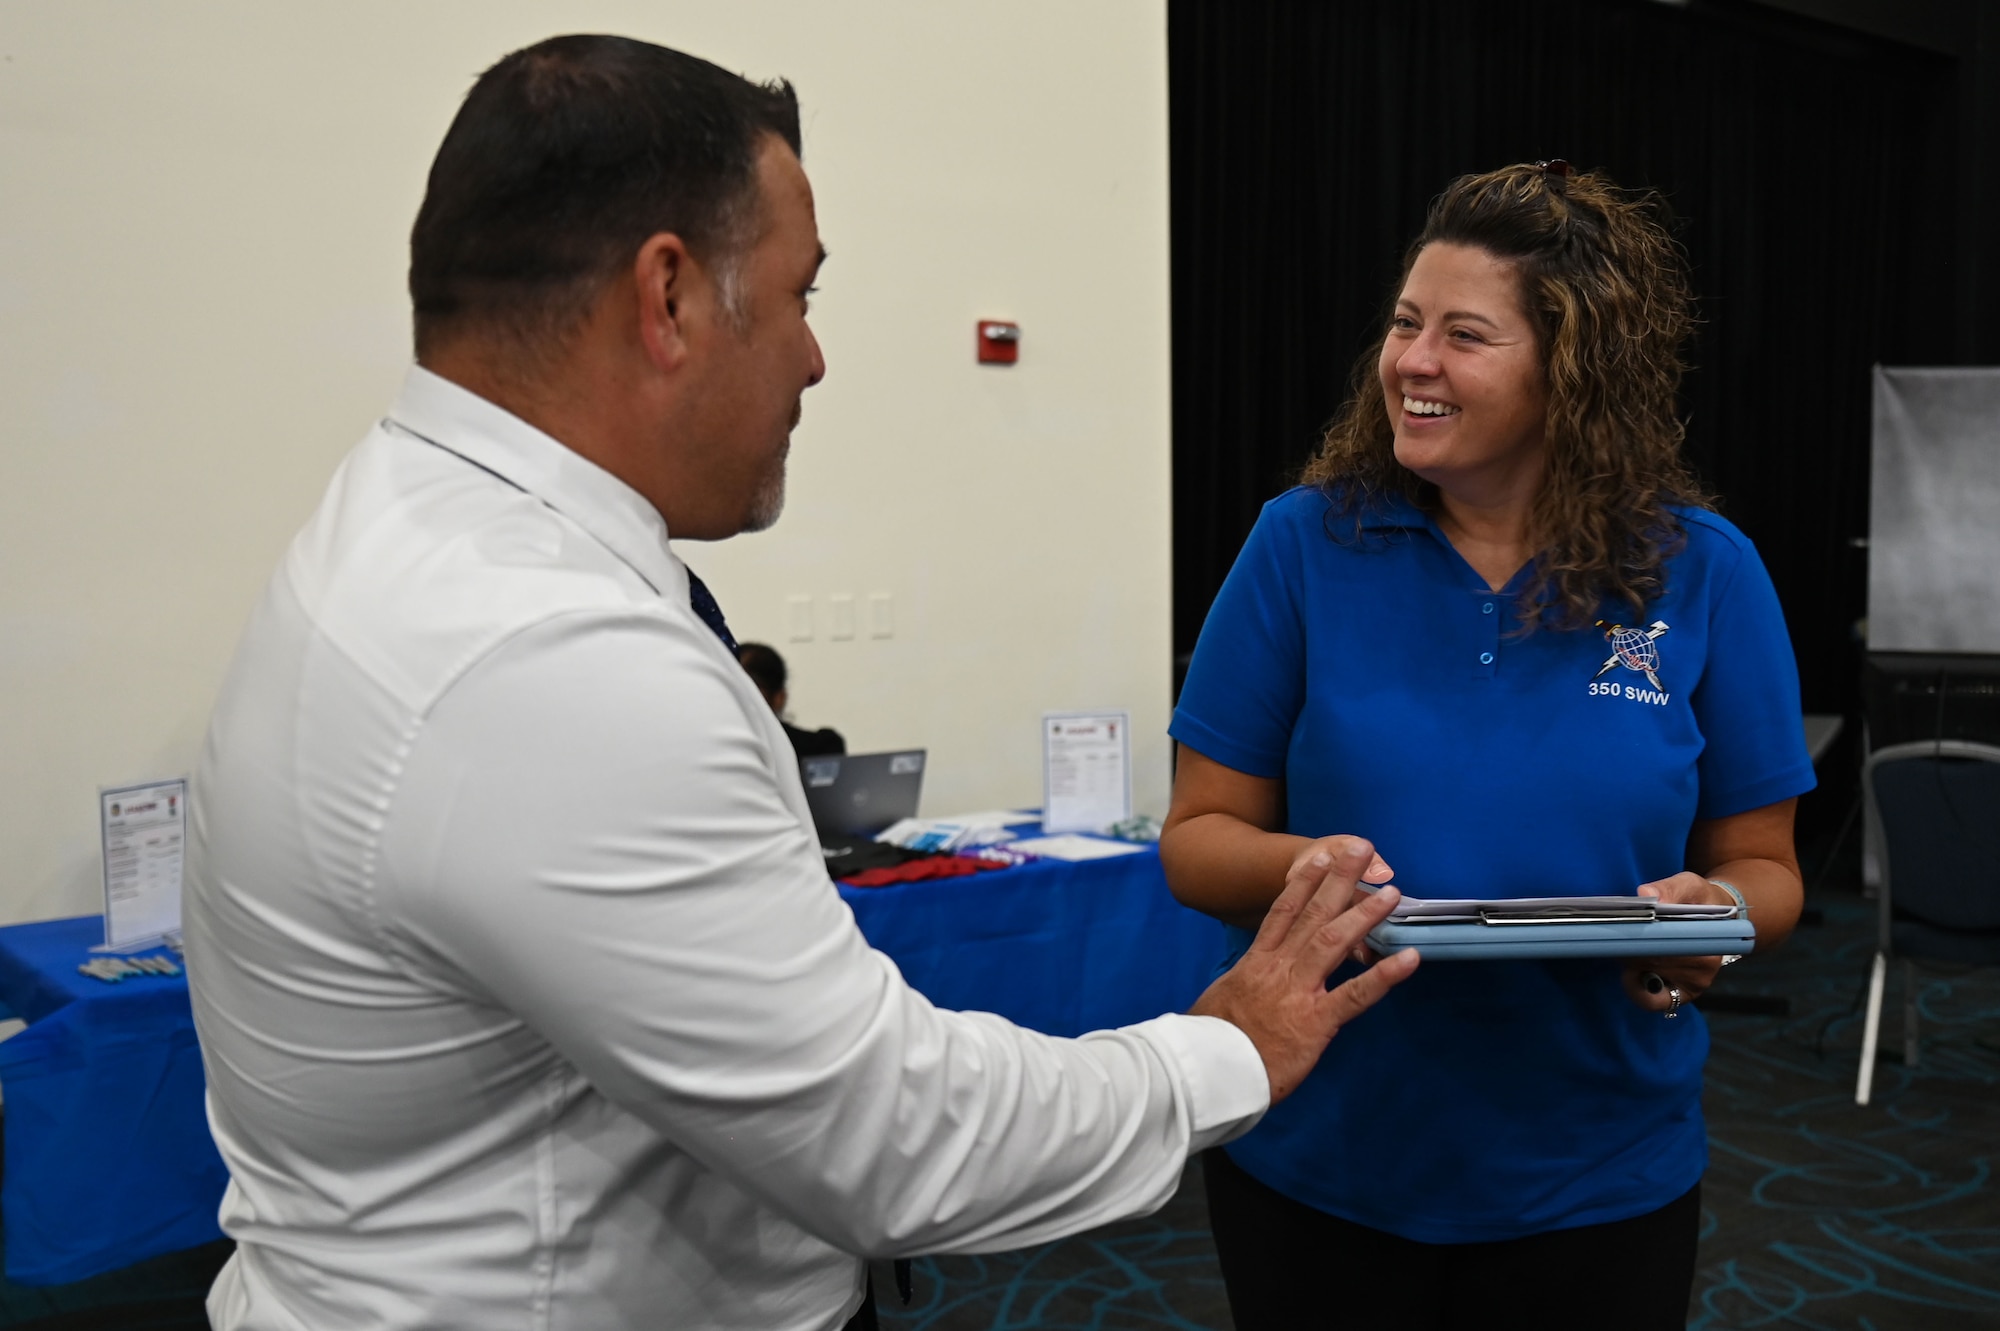 Misty D. Hutchison, 350th Spectrum Warfare Wing civilian personnel program specialist, talks with job seekers during a career summit at Fort Walton Beach, Fla., Aug. 17, 2023. At the 350th SWW, members are given the opportunity to deliver adaptive and cutting-edge electromagnetic spectrum capabilities that provide the warfighter a tactical and strategic competitive advantage and freedom to attack, maneuver, and defend. (U.S. Air Force photo by Staff Sgt. Ericka A. Woolever)